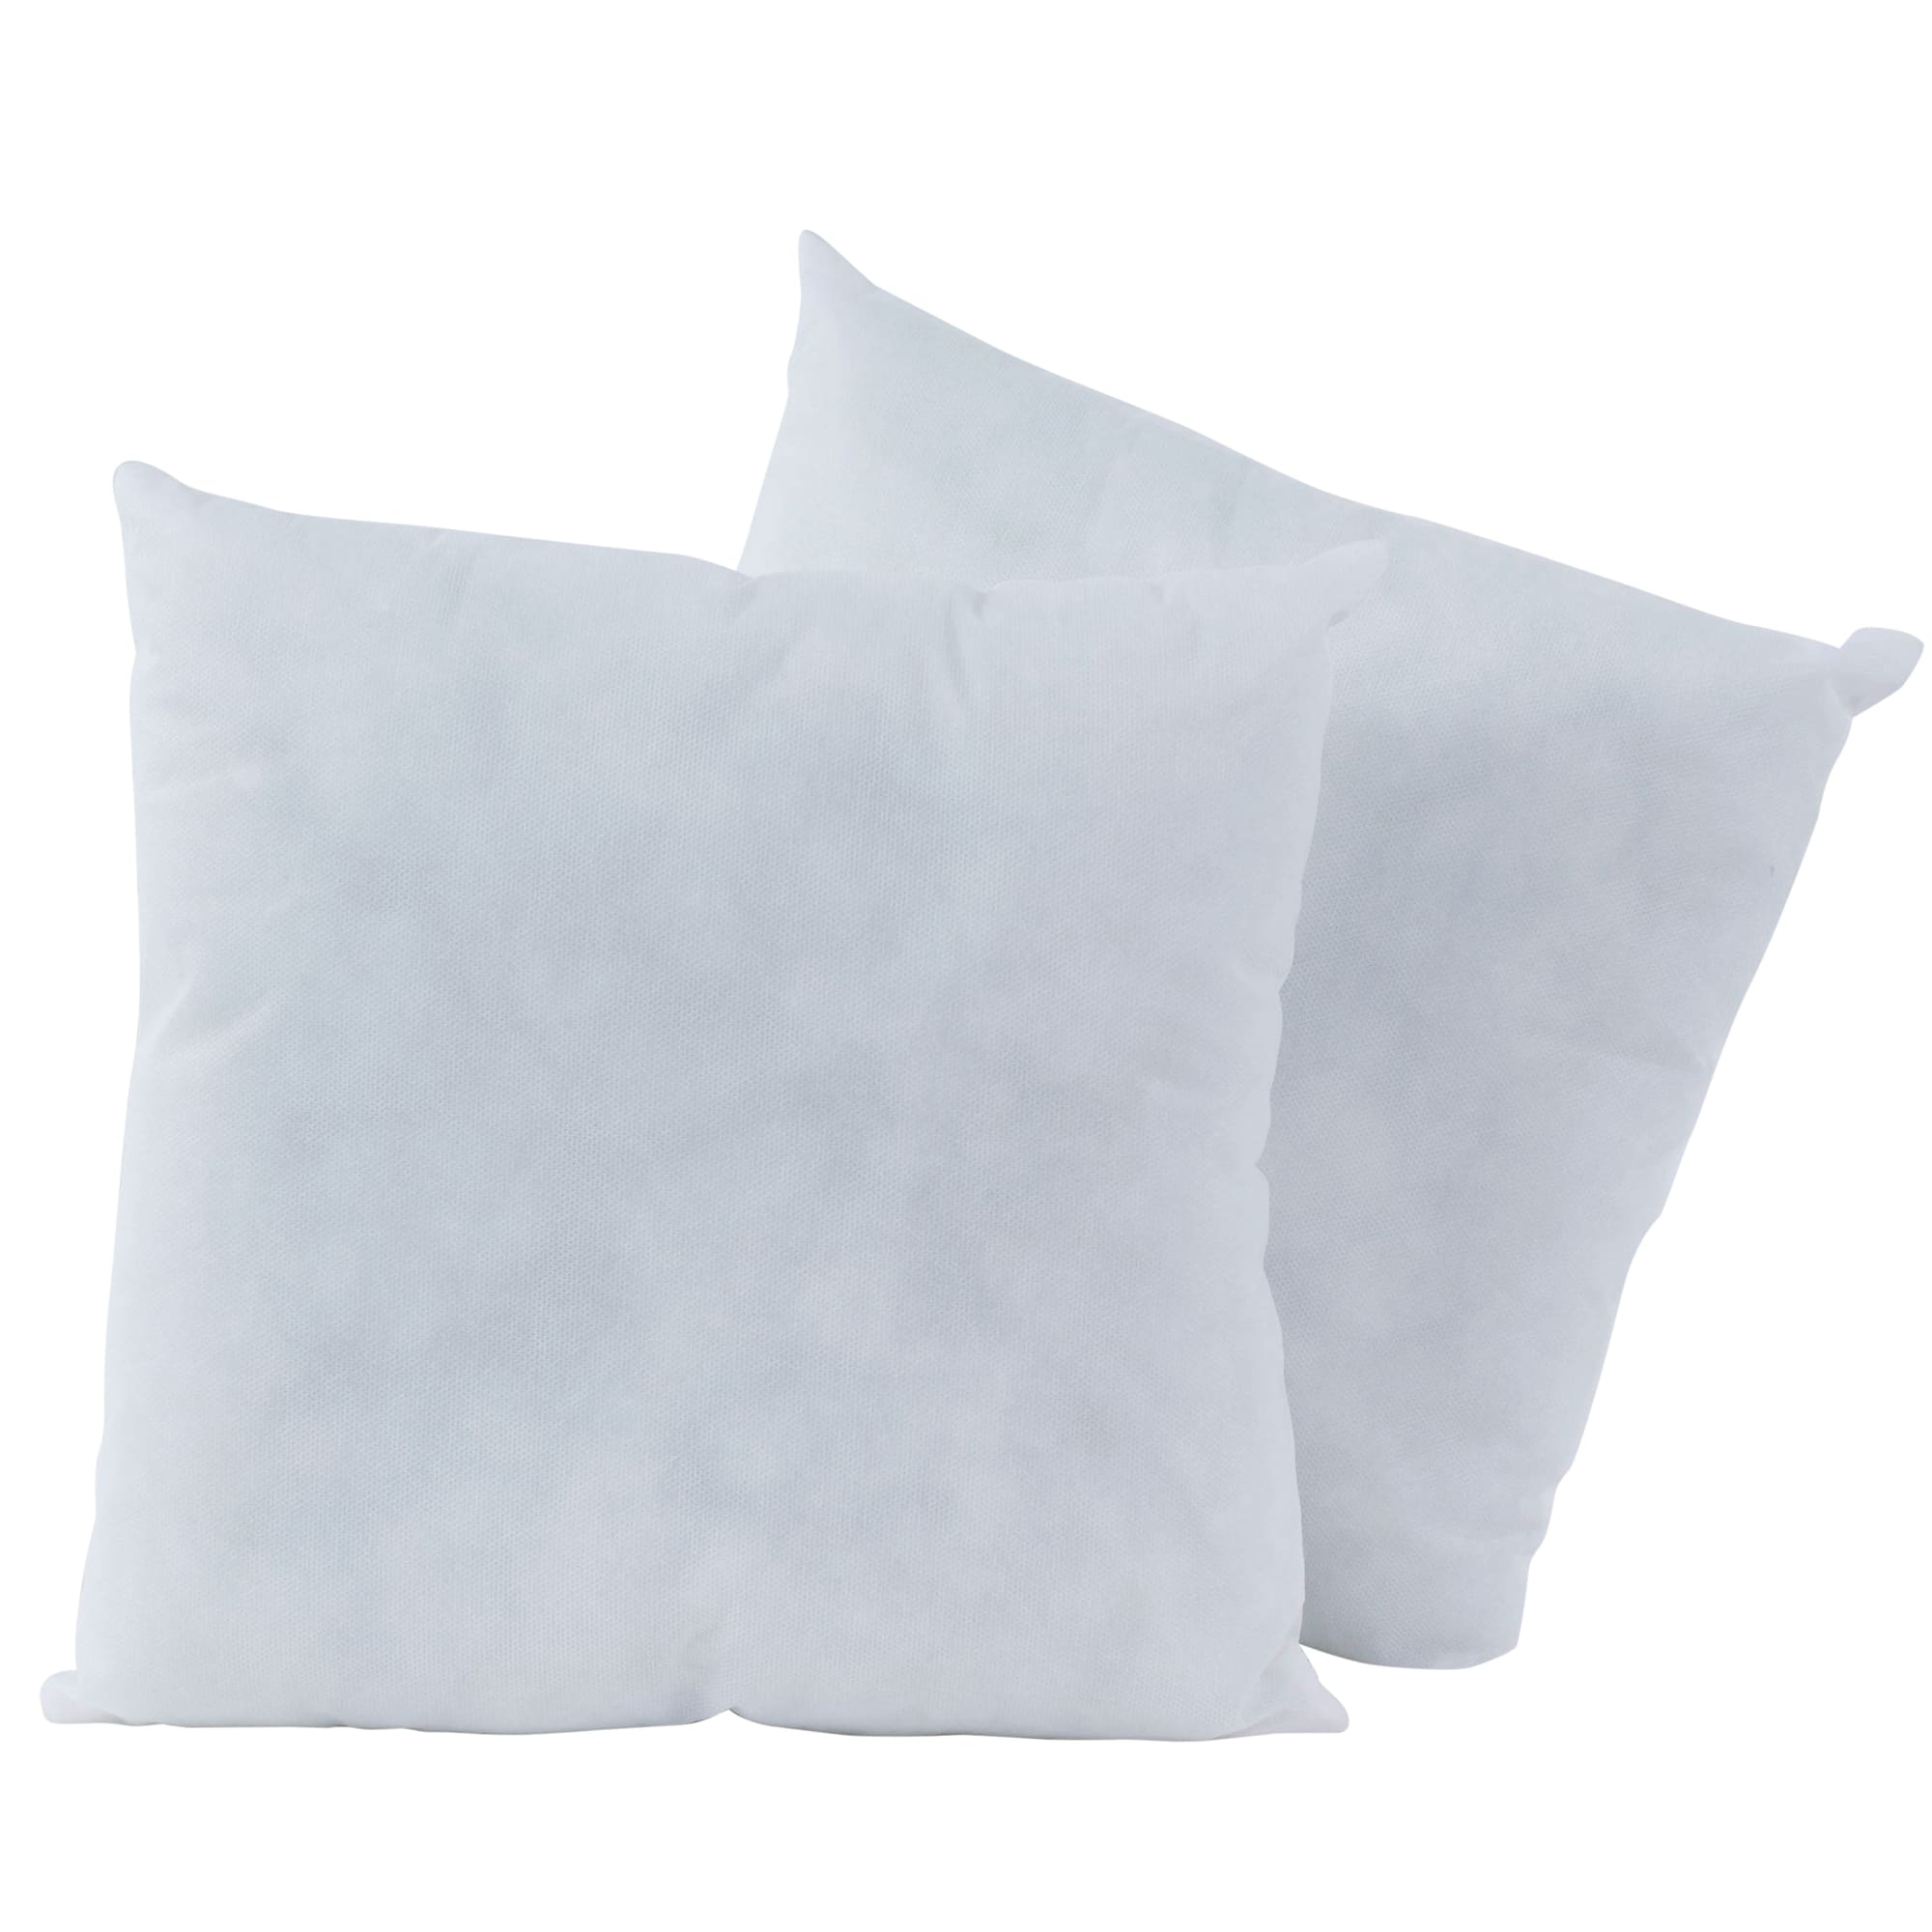 Fairfield Poly-Fil Basic Decorative Throw Pillow Inserts 14 inch x 14 inch, White, 2 Pack